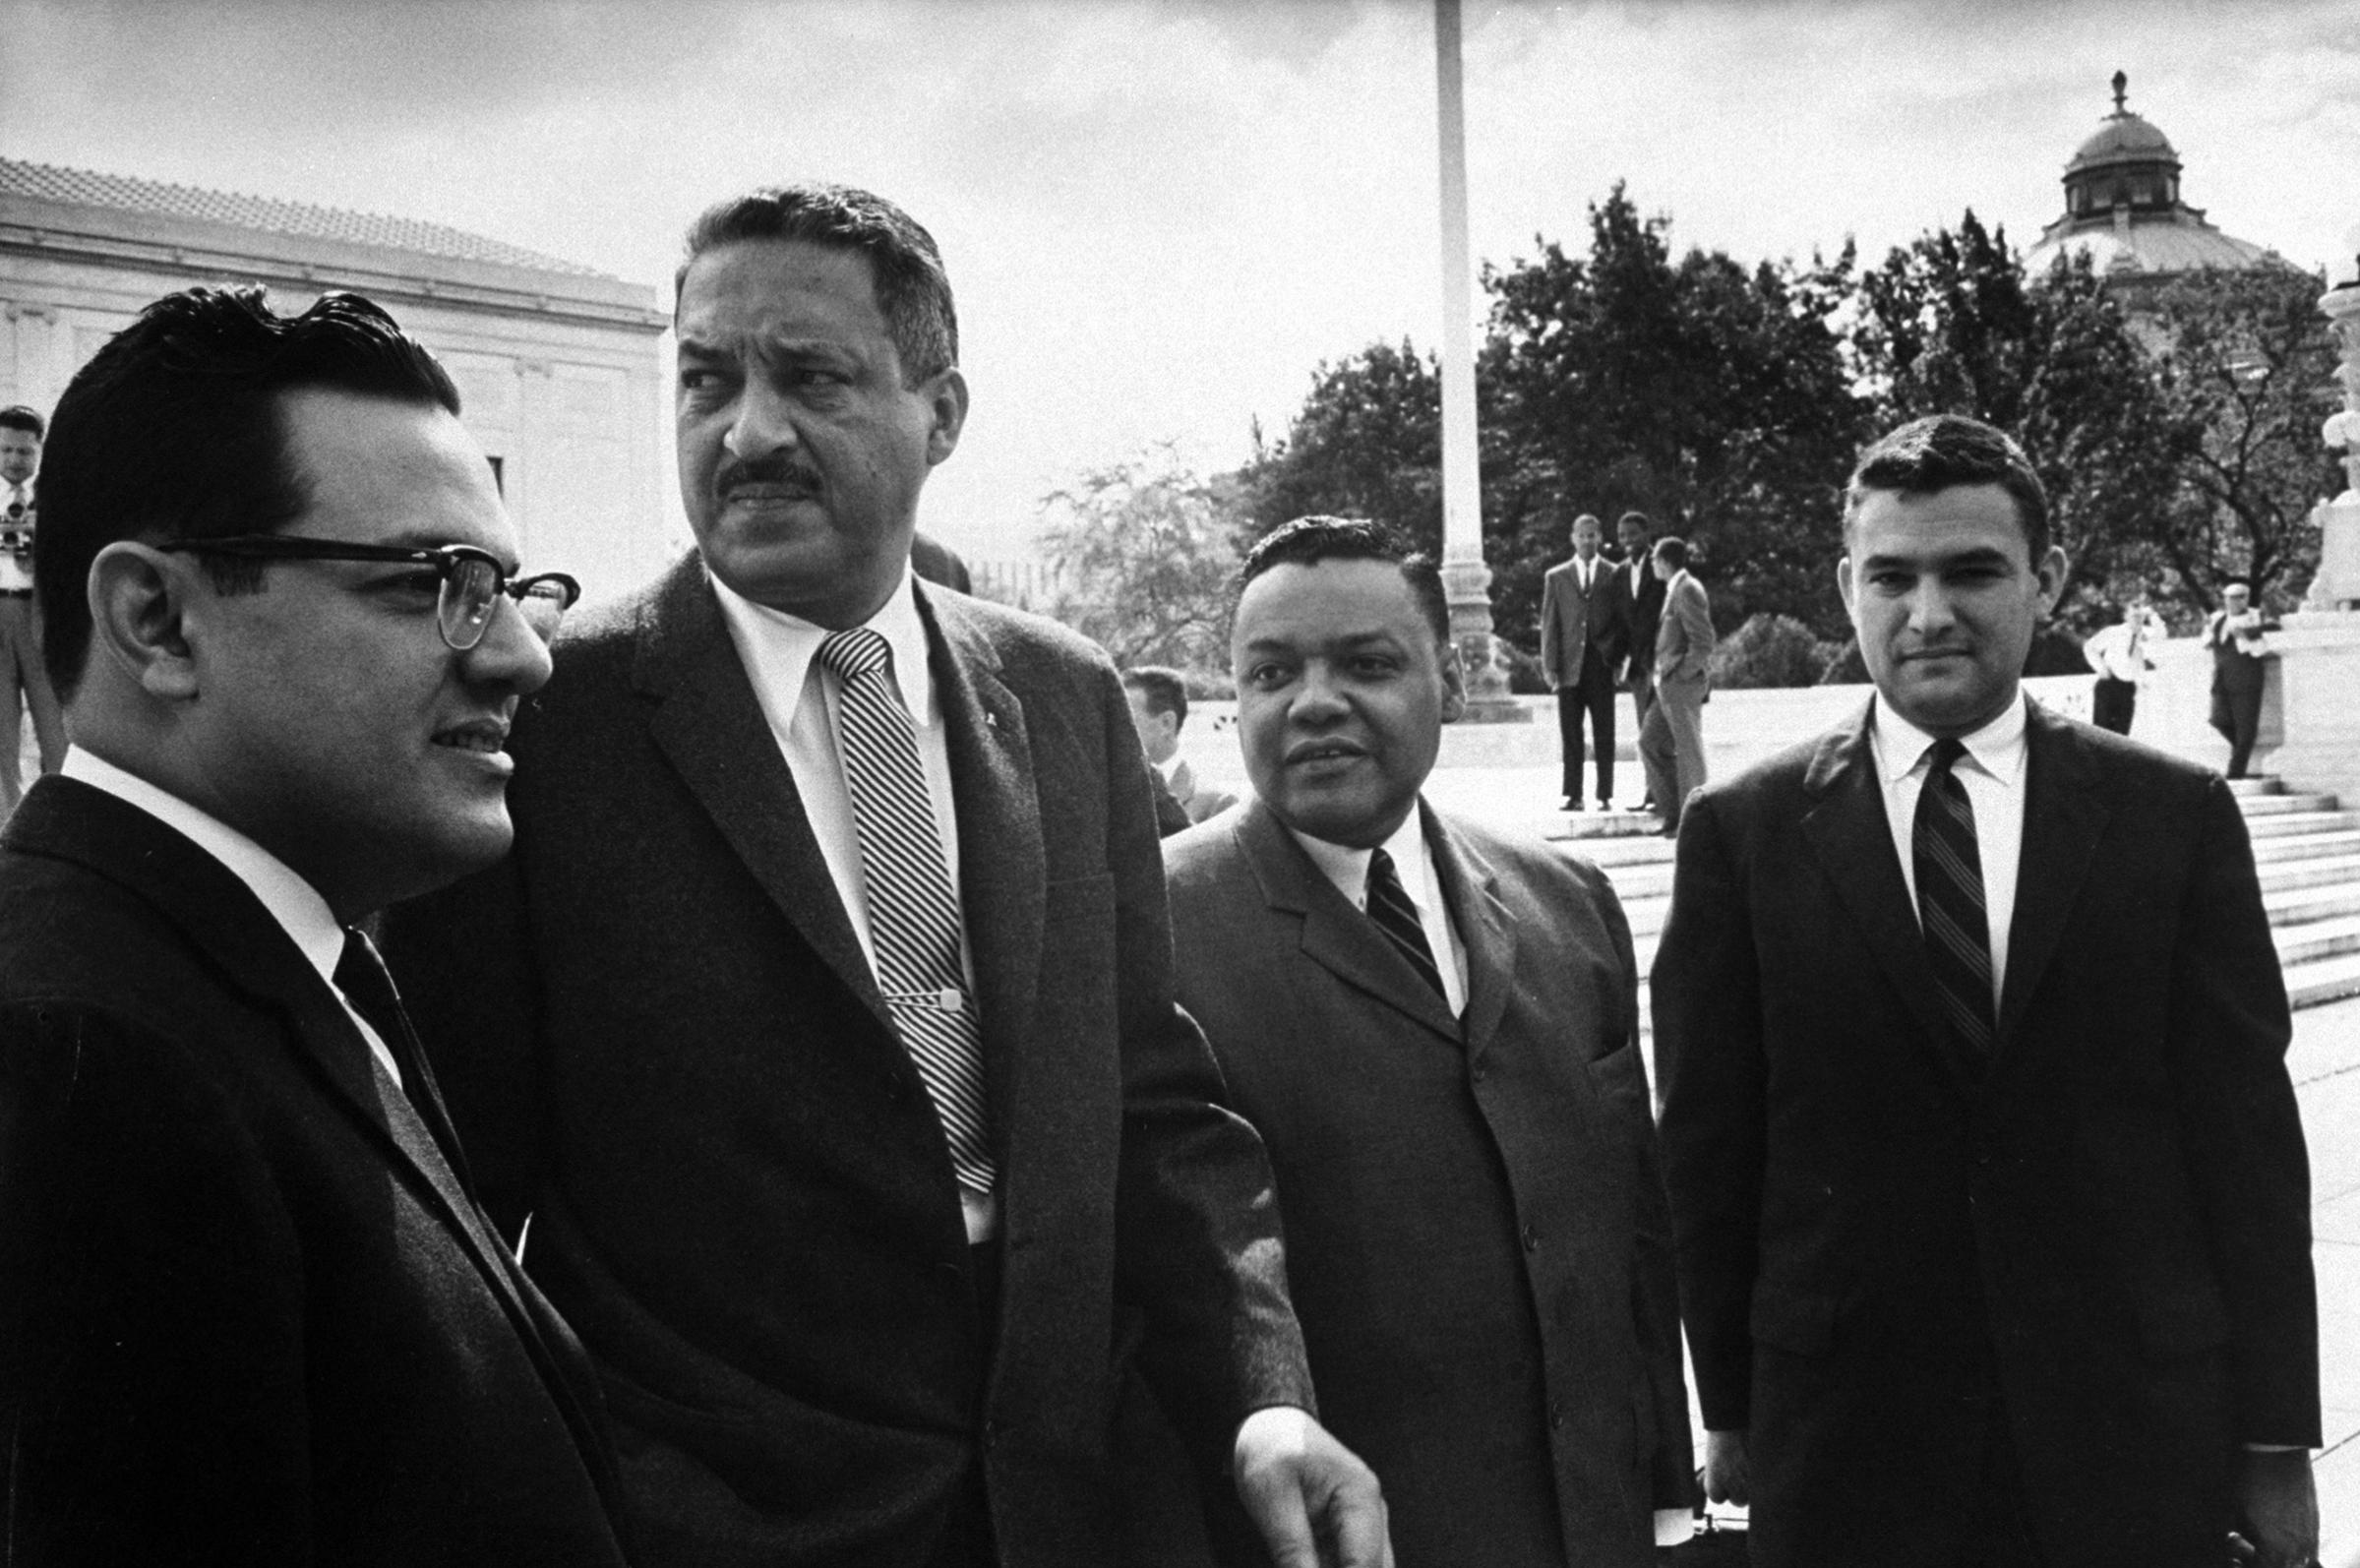 Thurgood Marshall and others leaving the U.S.Supreme Court after hearing on School Intergration, 1958.